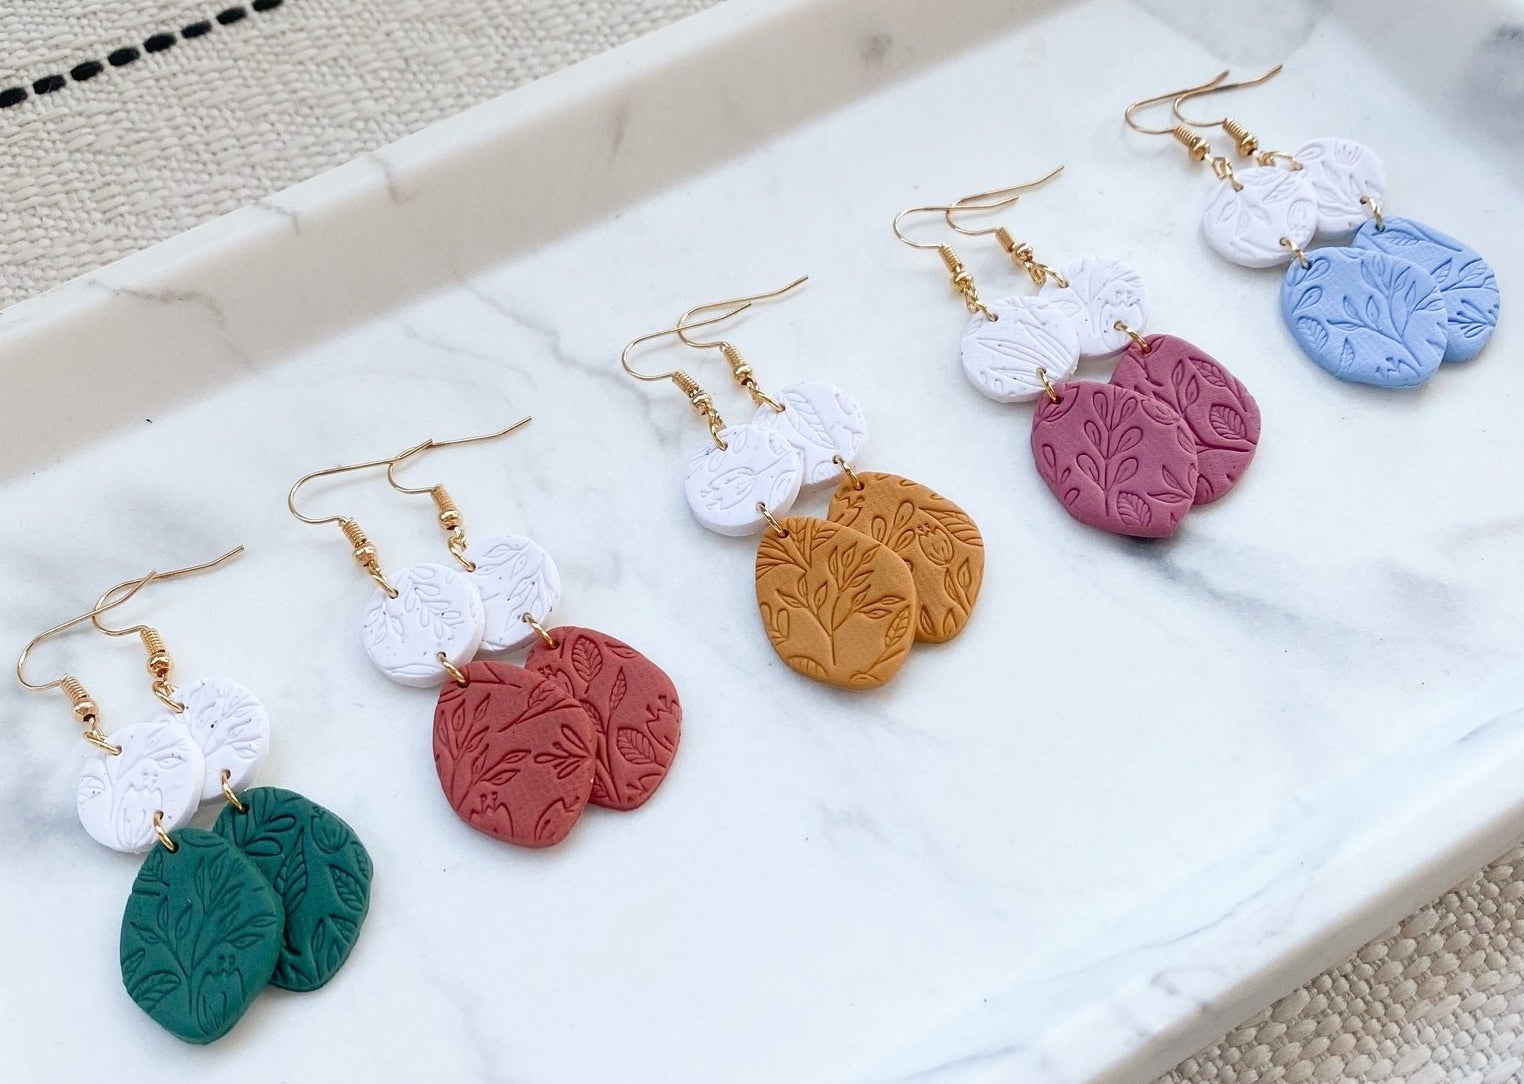 Earrings with floral imprints in a range of color options.